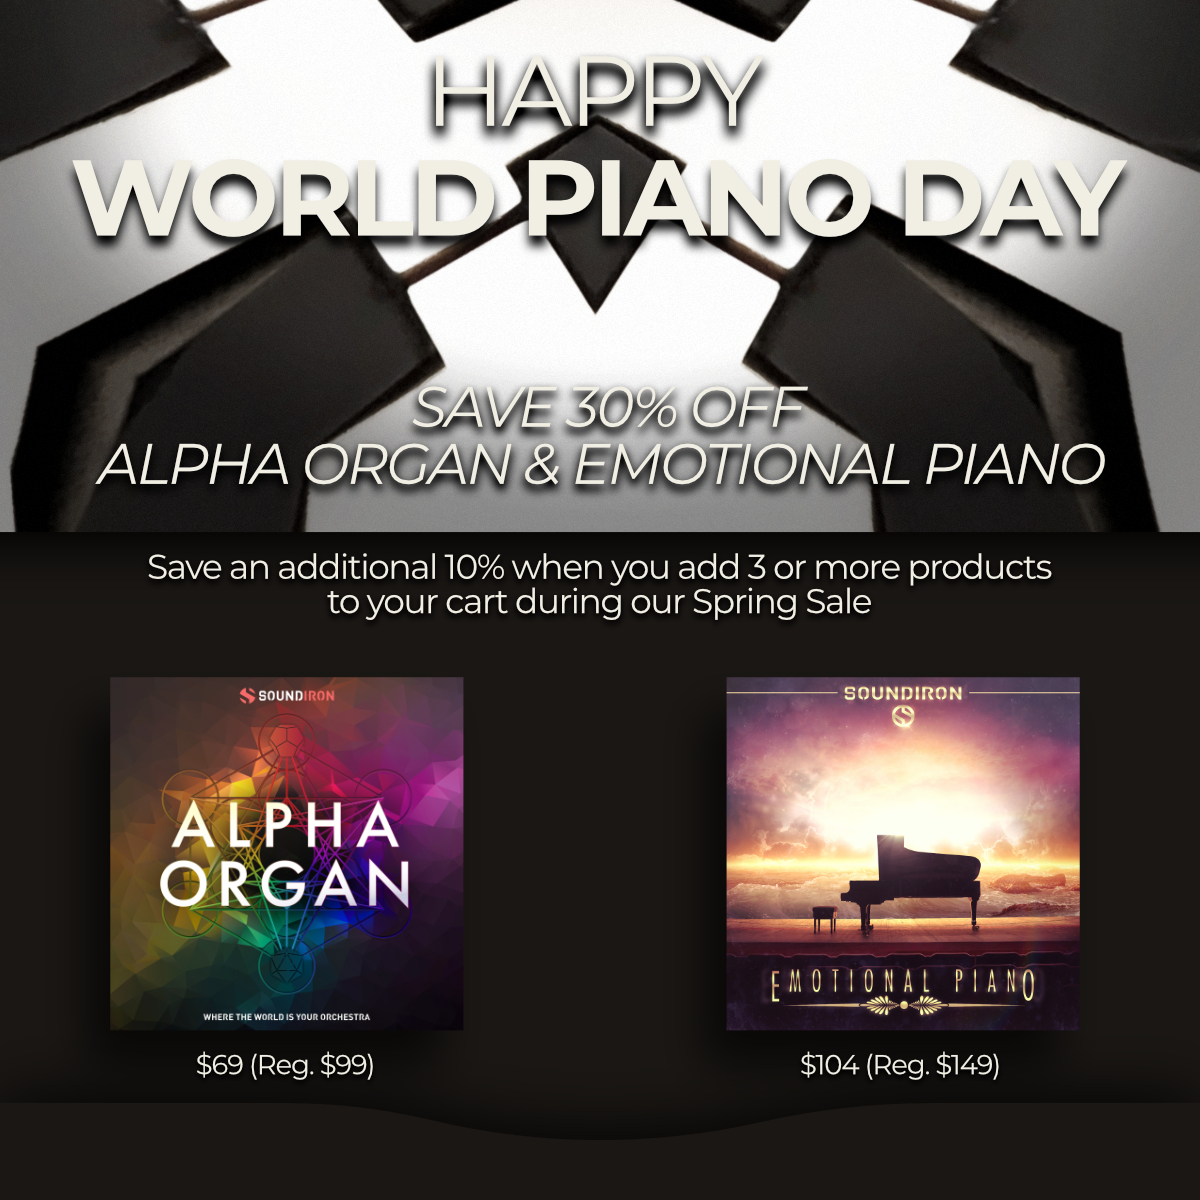 Happy World Piano Day! During our Spring Sale, you can save 30% on our Alpha Organ and Emotional Piano, as well as our other Kontakt Player products. Additionally, you can save an extra 10% when you add 3 or more products to your cart at checkout. soundiron.com/collections/on…